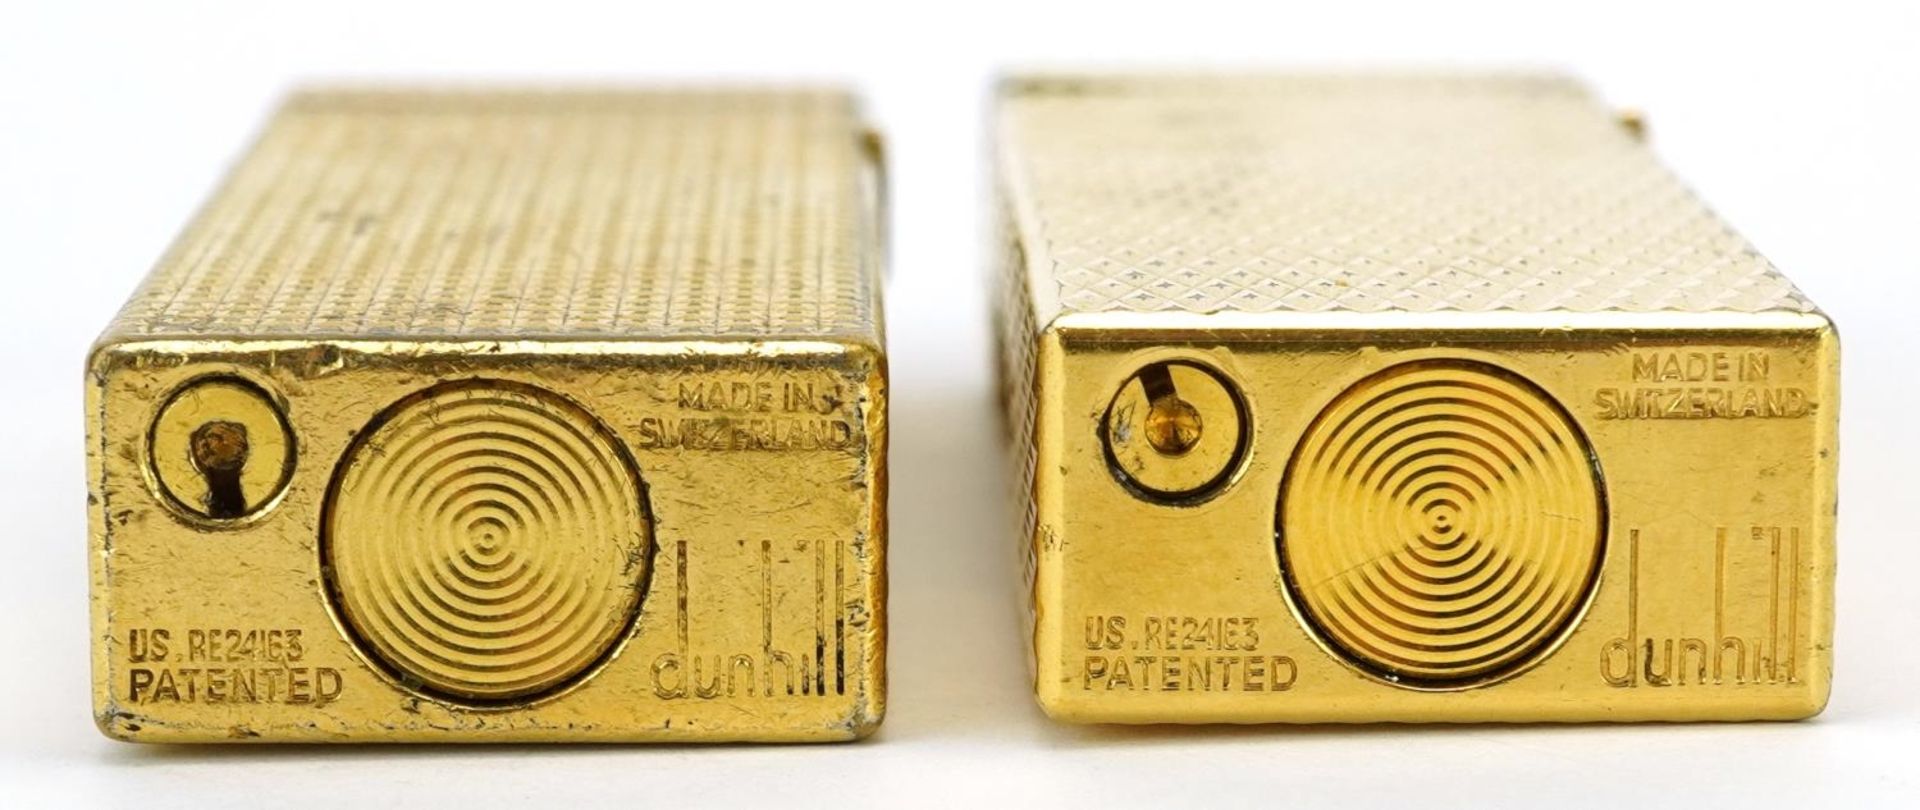 Two Dunhill gold plated pocket lighters with engine turned bodies : For further information on - Image 3 of 3